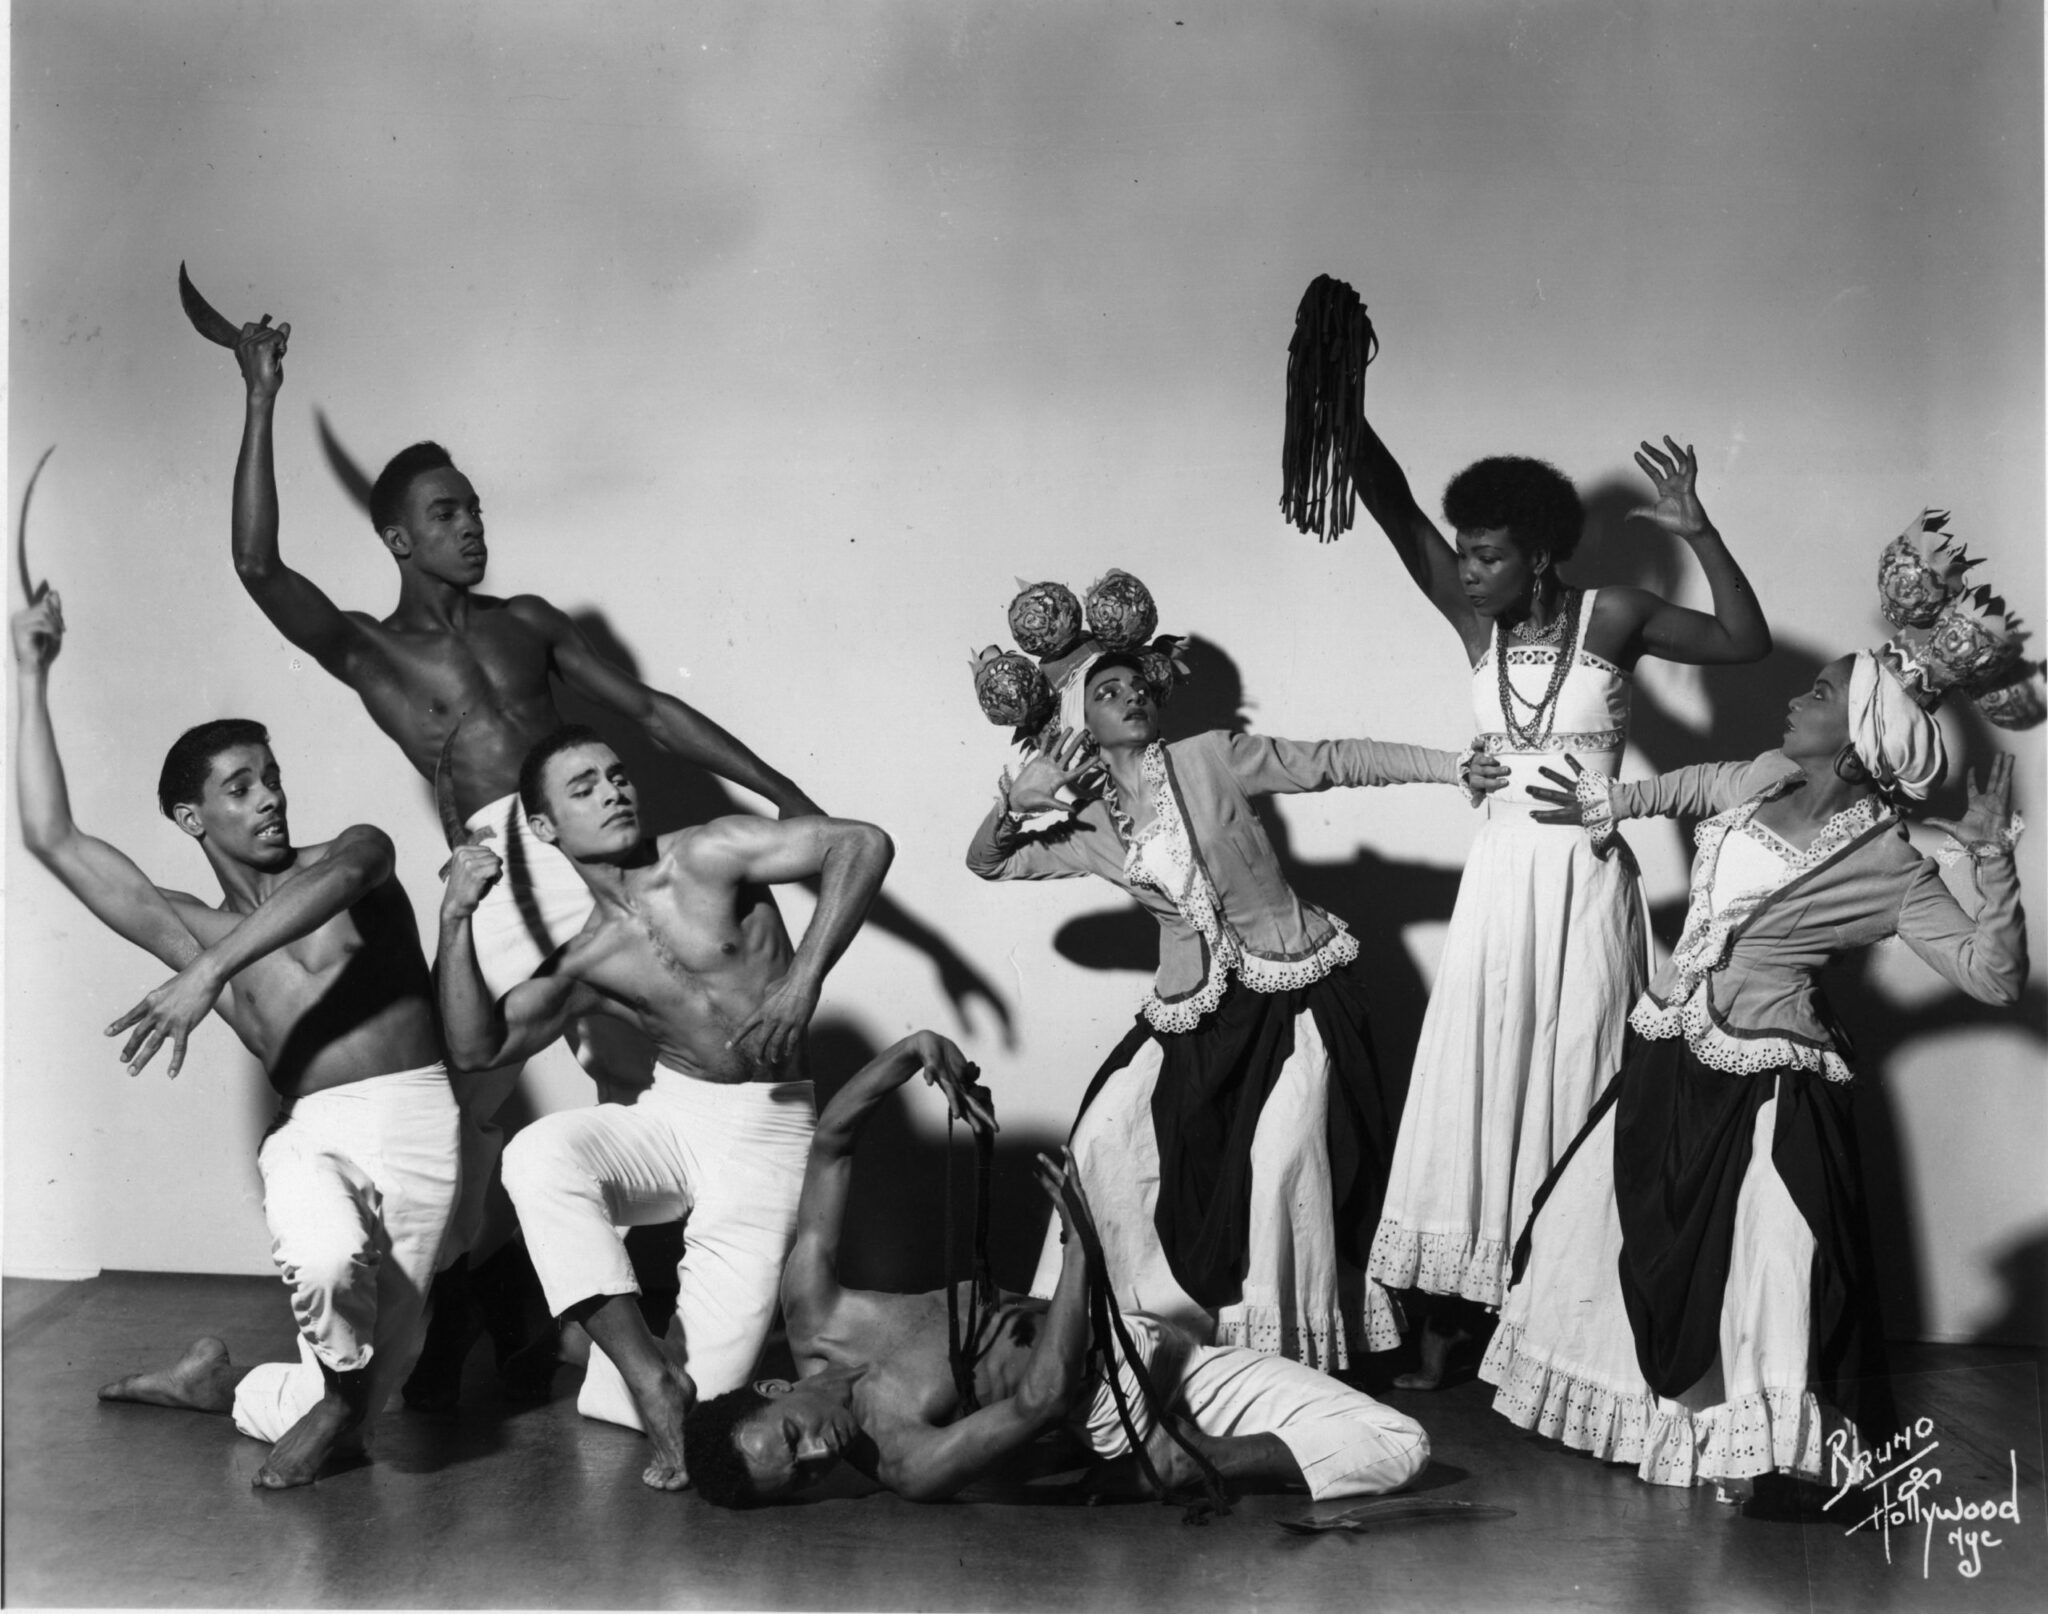 who was katherine dunham and what was katherine dunhams contribution to dance and the arts